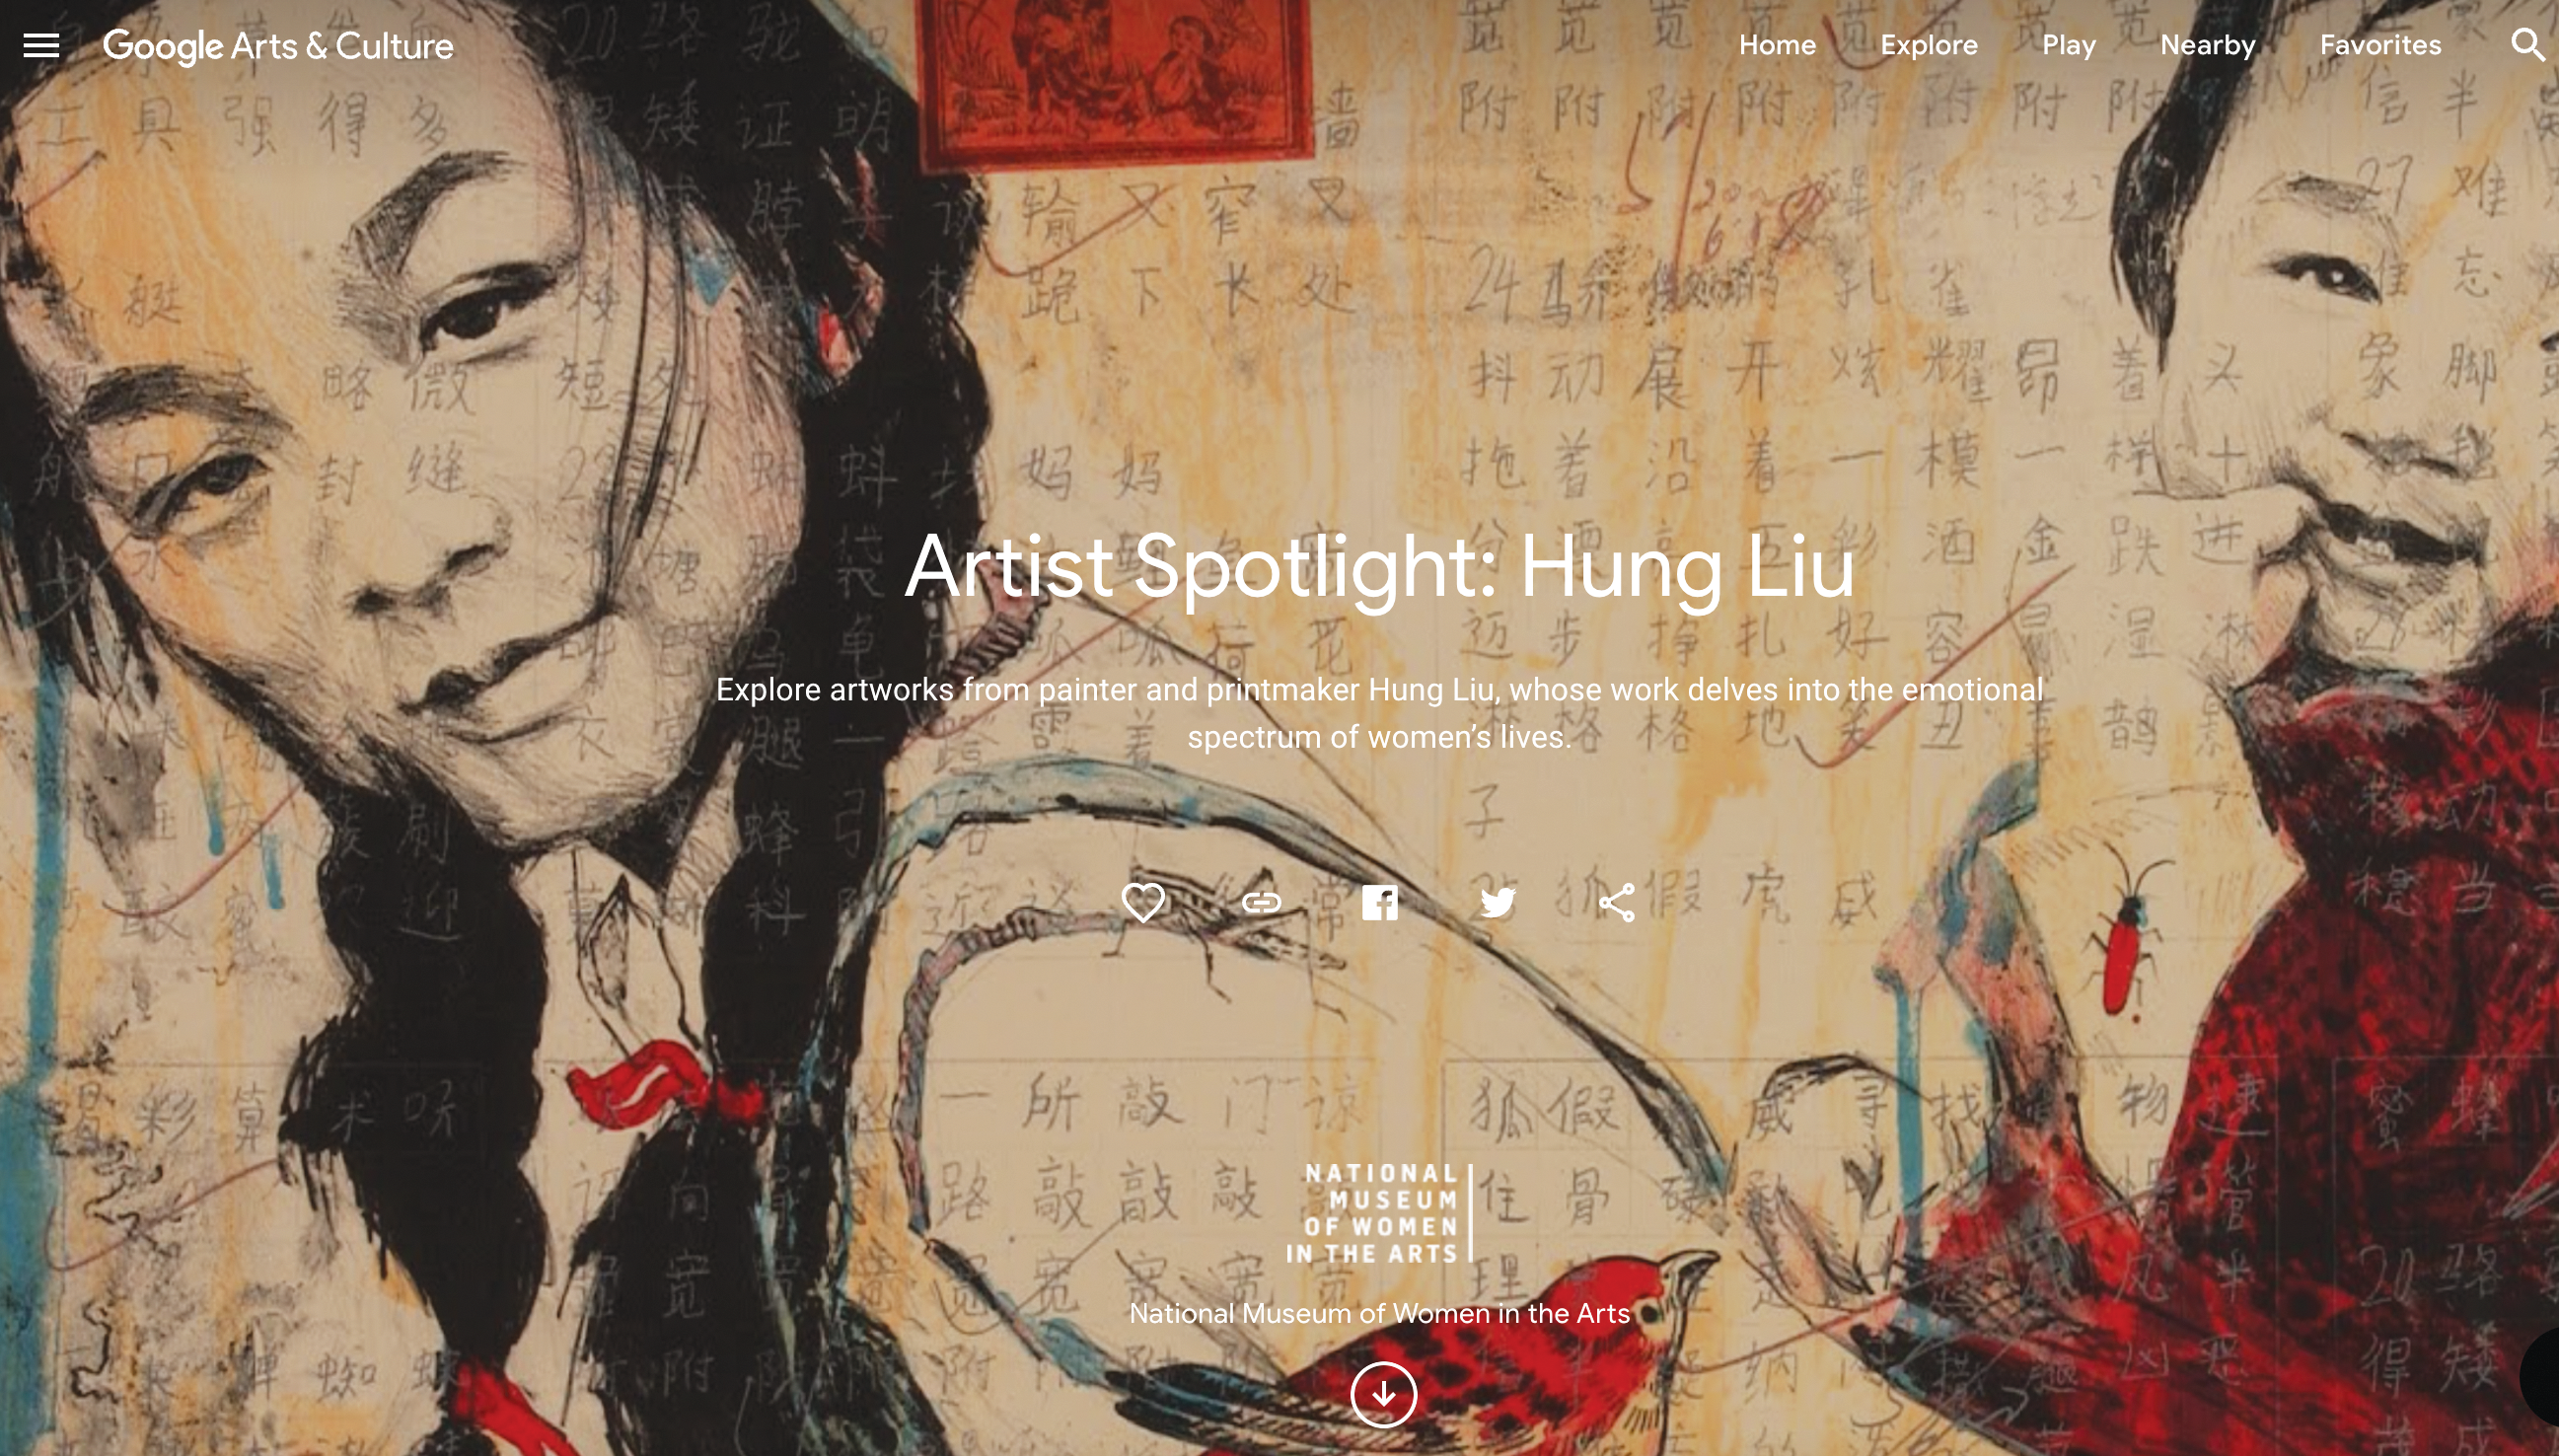 A screen shot of an online Google Arts and Culture exhibition shows a detail of a painting by artist Hung Liu. A young Asian girl with light skin and black hair in a bun carries a baby on her back. They are rendered atop a collage of Chinese writings, red envelopes, a red bird, and a grasshopper. The text overlay reads “Artist Spotlight: Hung Liu.”